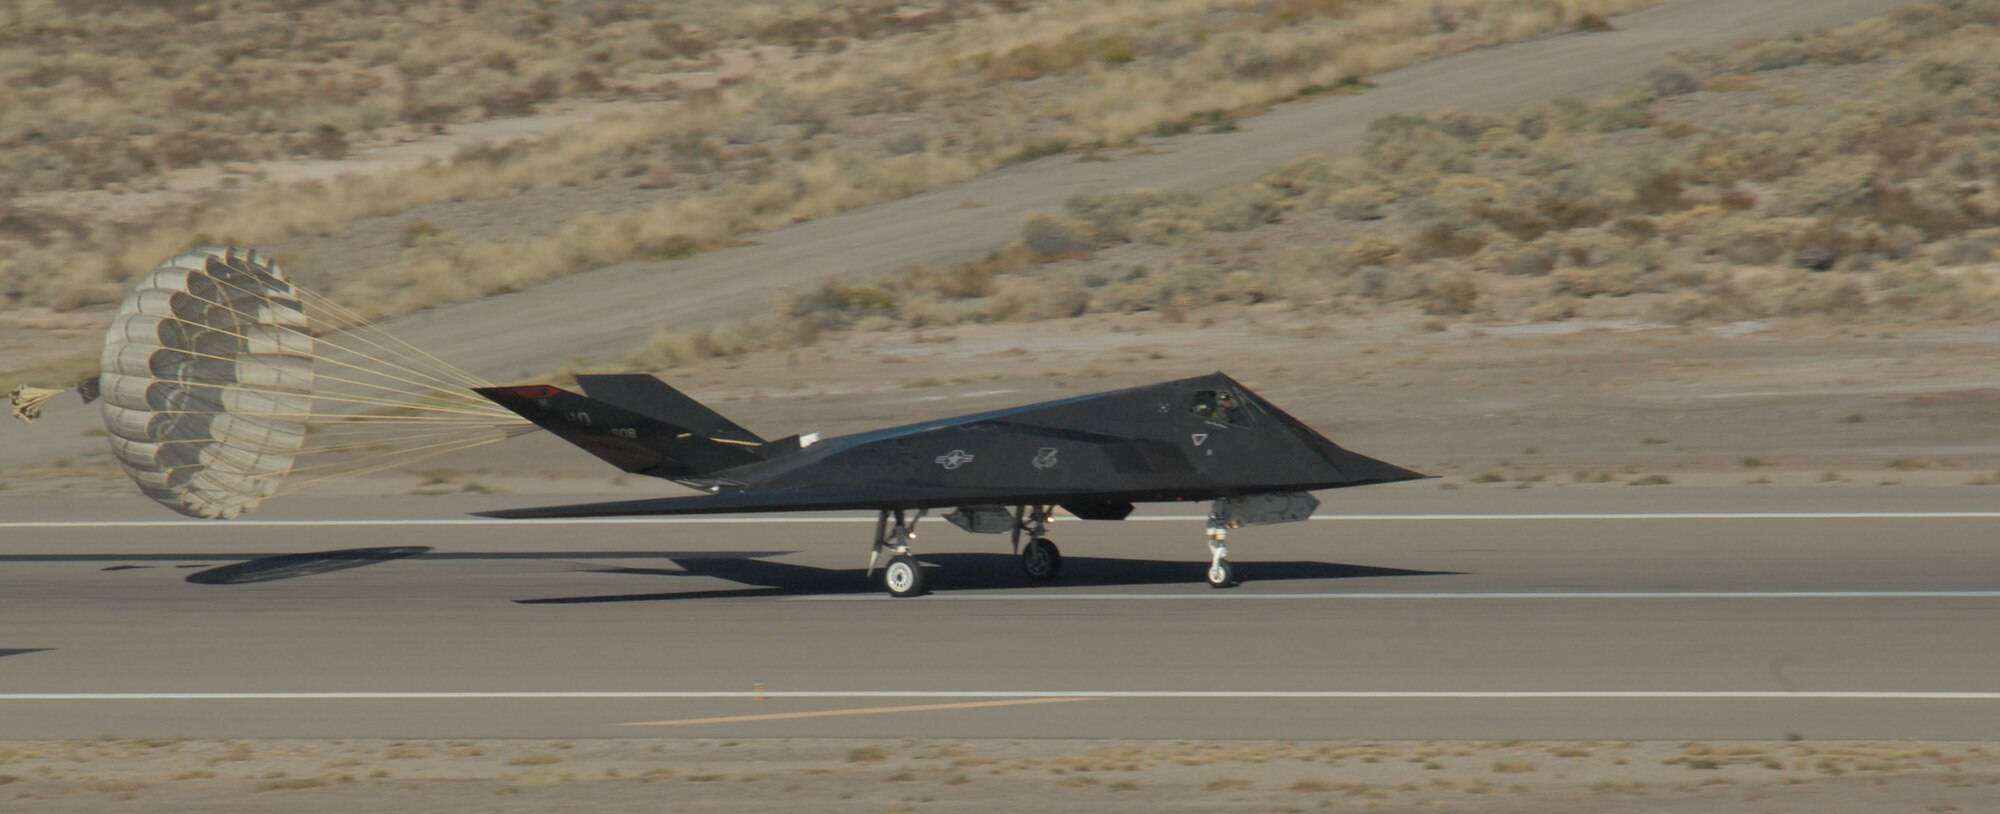 An F-117A Nighthawk from Holloman AFB, New Mexico lands after returning from its pre-show rehearsal October 26, 2007. The Holloman Air and Space Expo is a showcase of Air Force capabilities, the 49th Fighter Wing mission, and the X Prize Foundation.(US Air Force photo by Airman First Class Tiffany AM Trojca)
